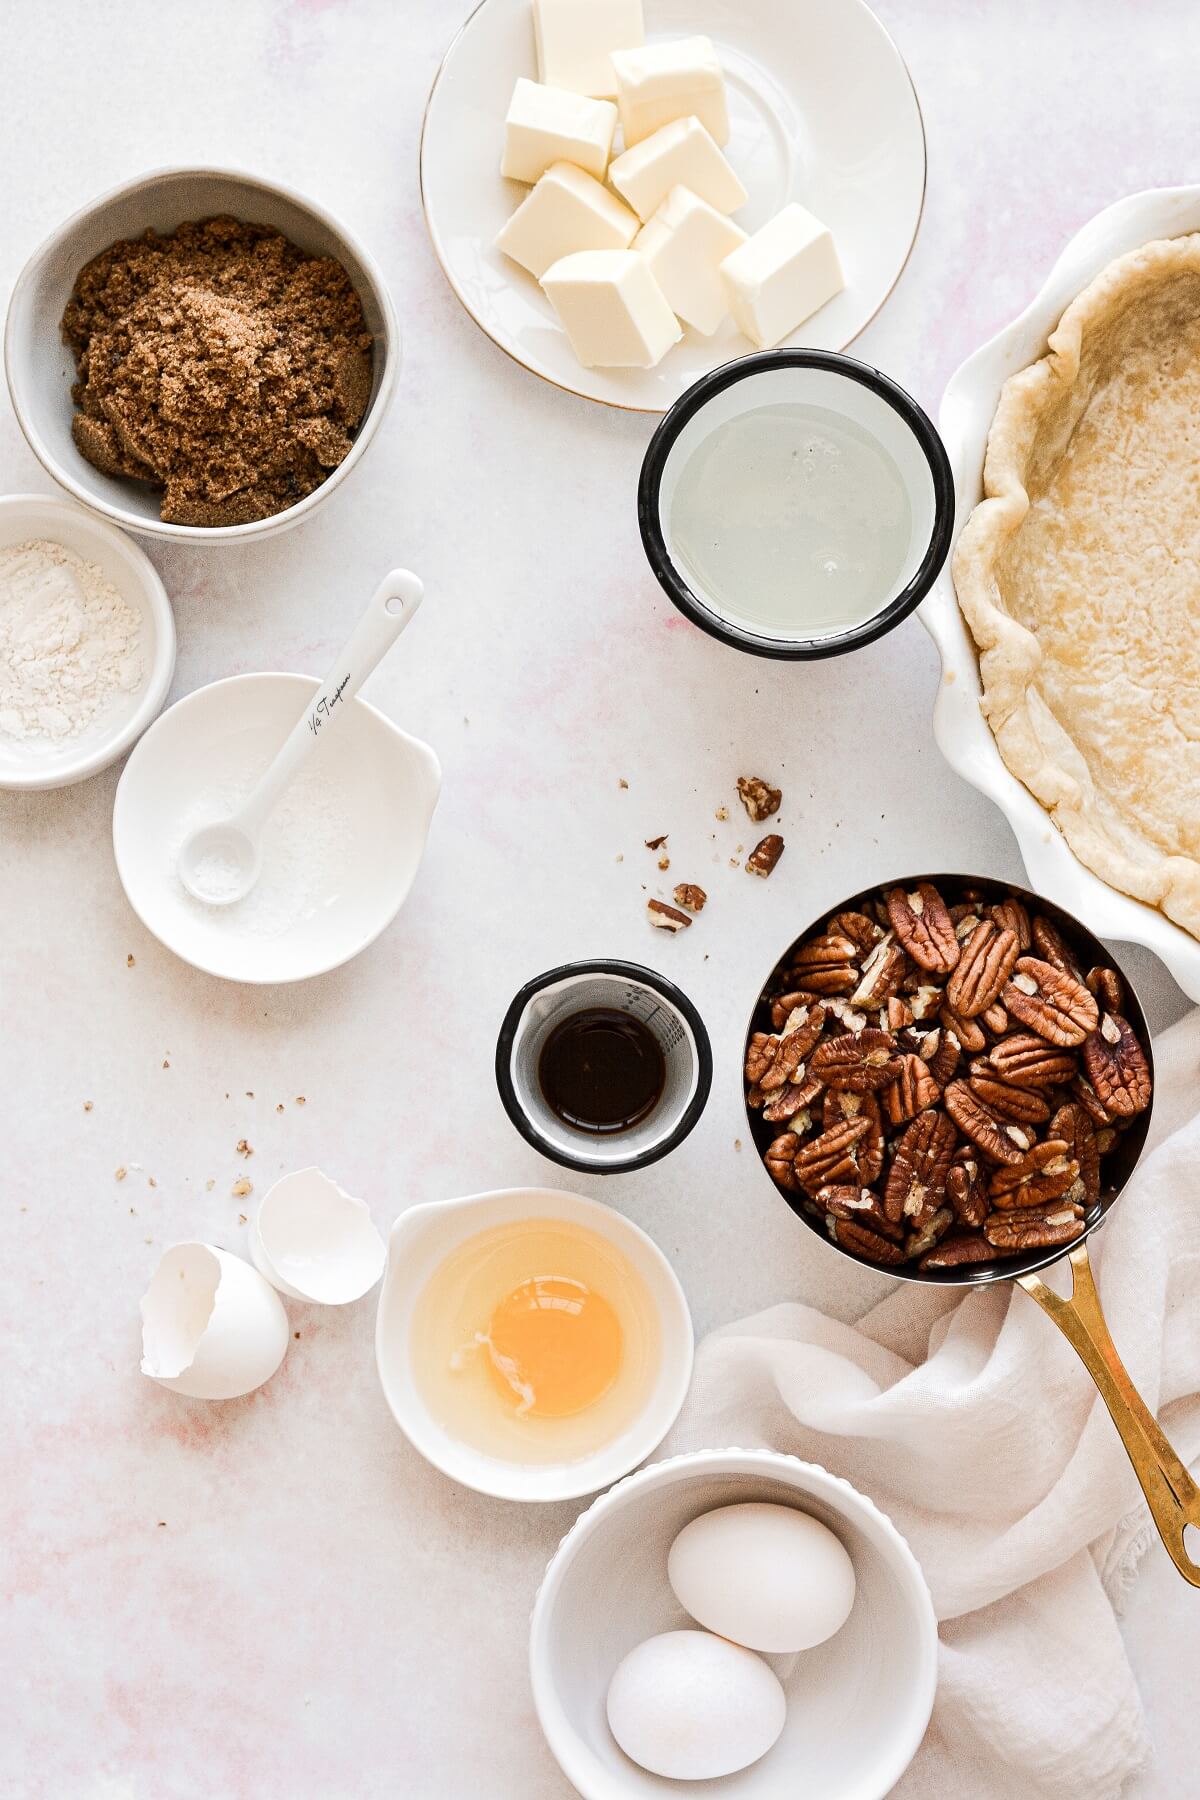 Ingredients for a classic pecan pie.